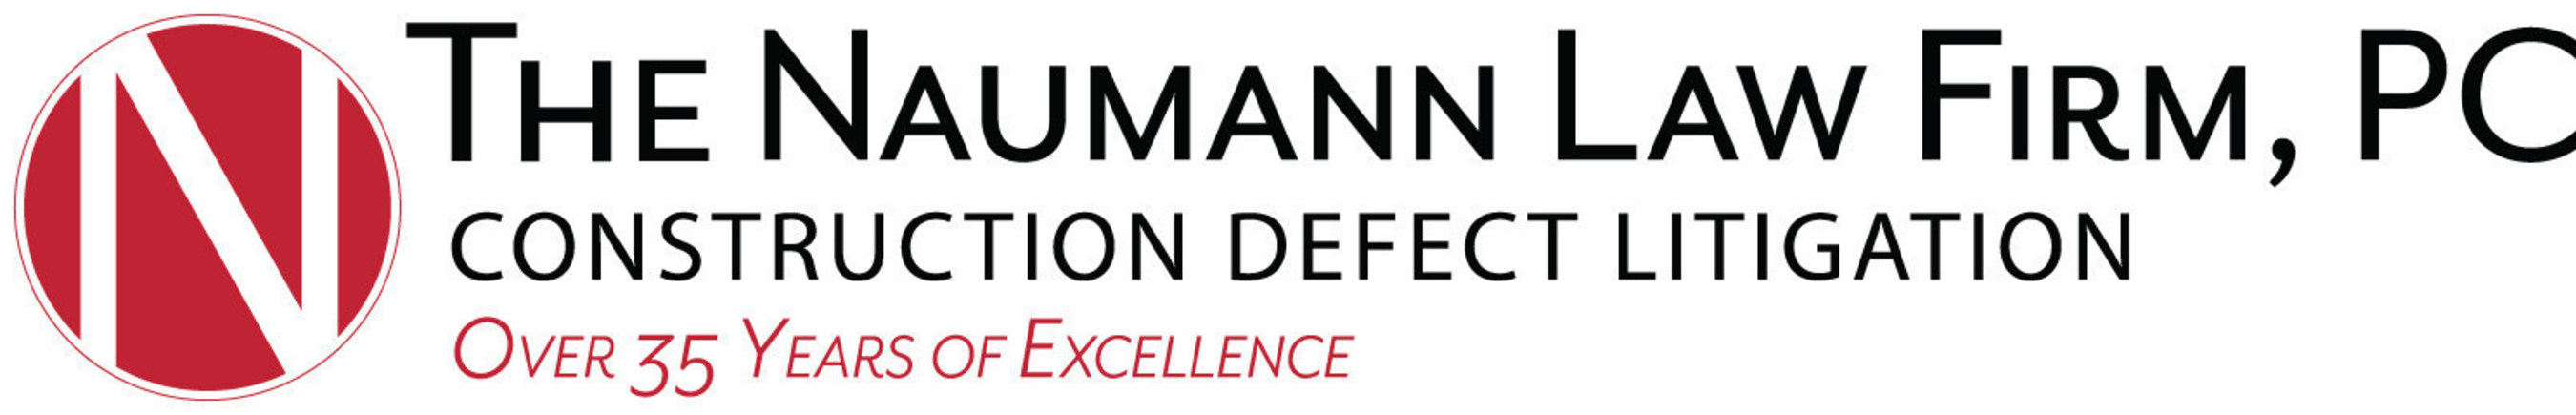 The Naumann Law Firm, PC and JCL Law Firm, APC, announce over $4,000,000.00 recovered for construction defects